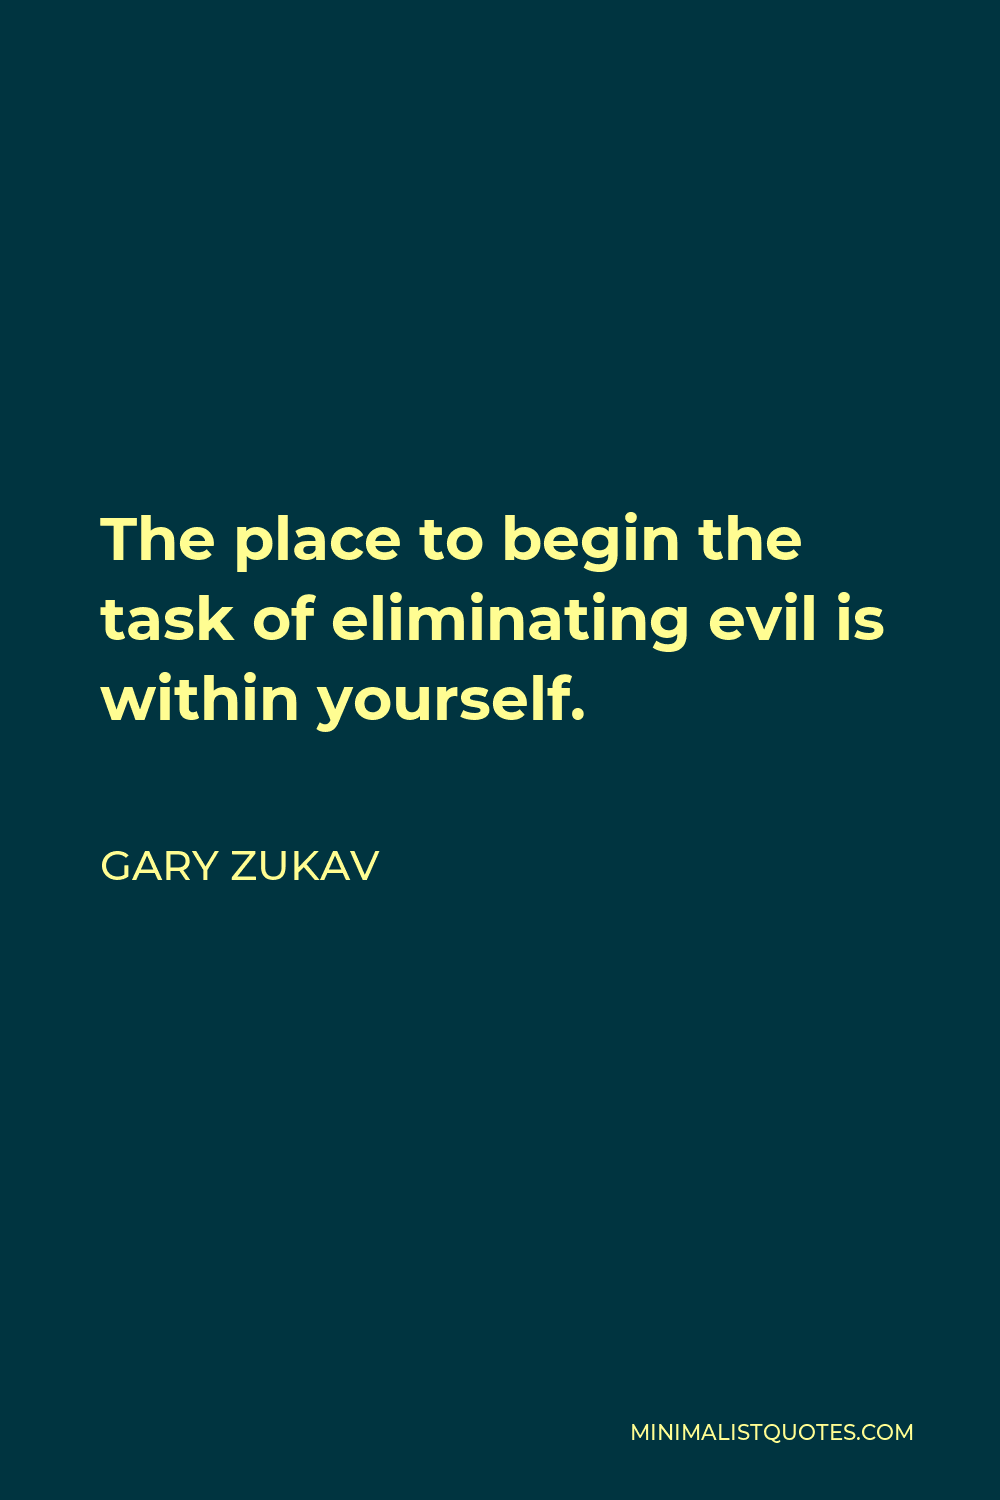 Gary Zukav Quote - The place to begin the task of eliminating evil is within yourself.